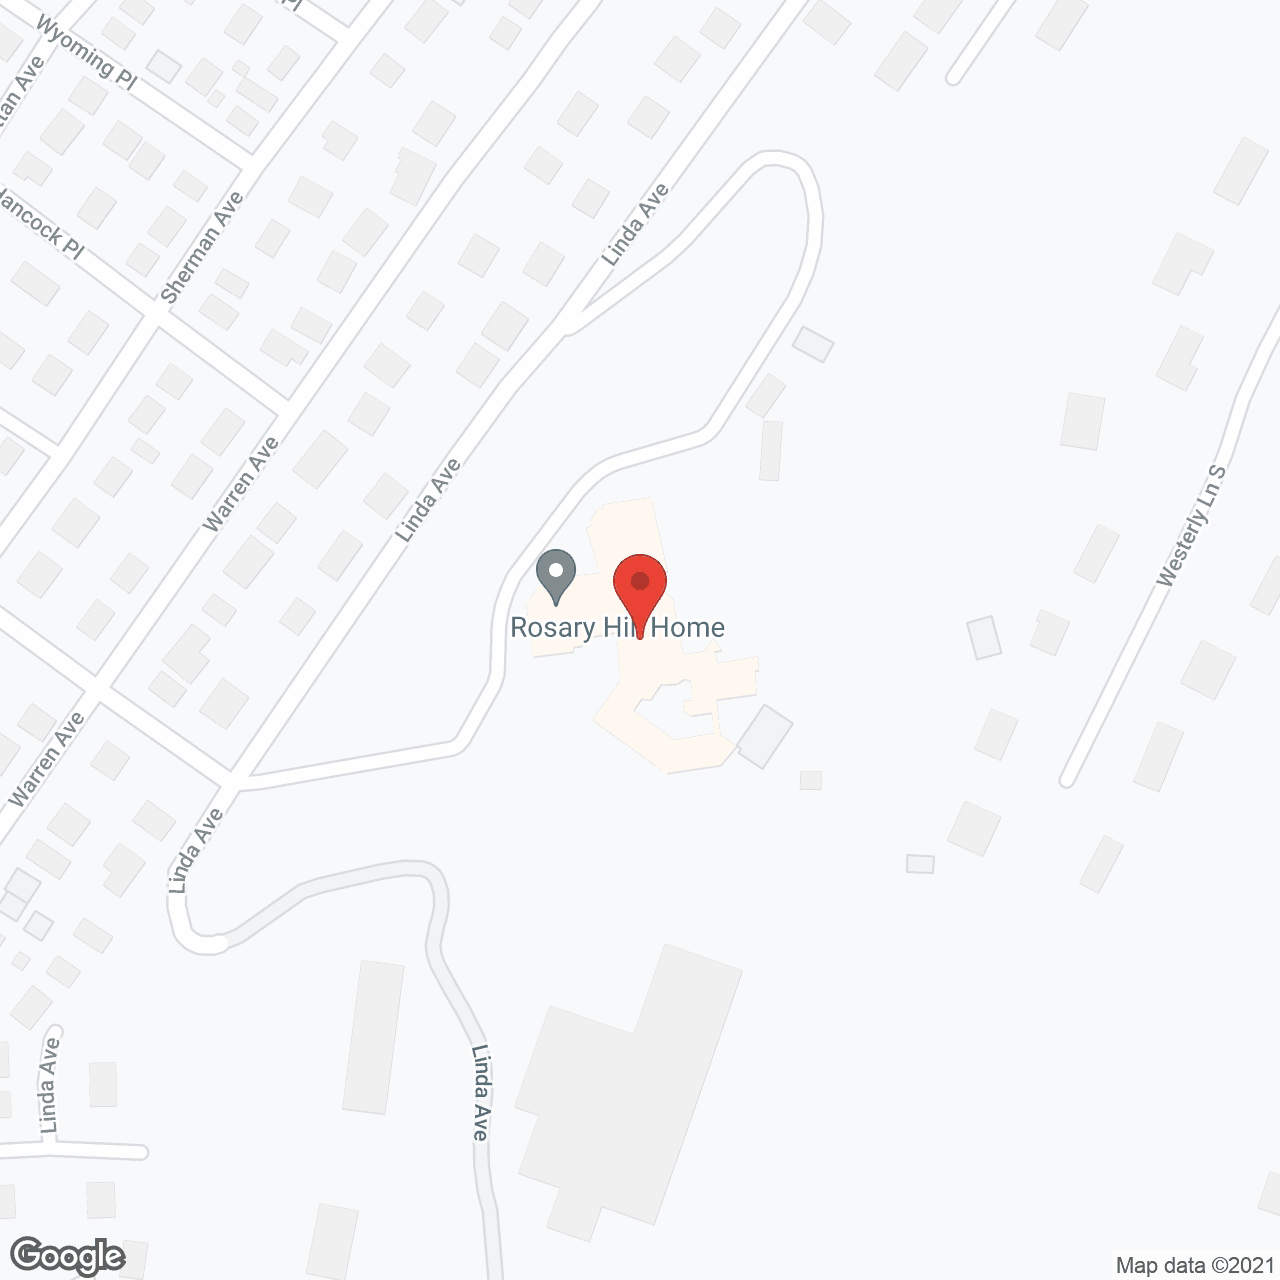 Rosary Hill Nursing Home in google map